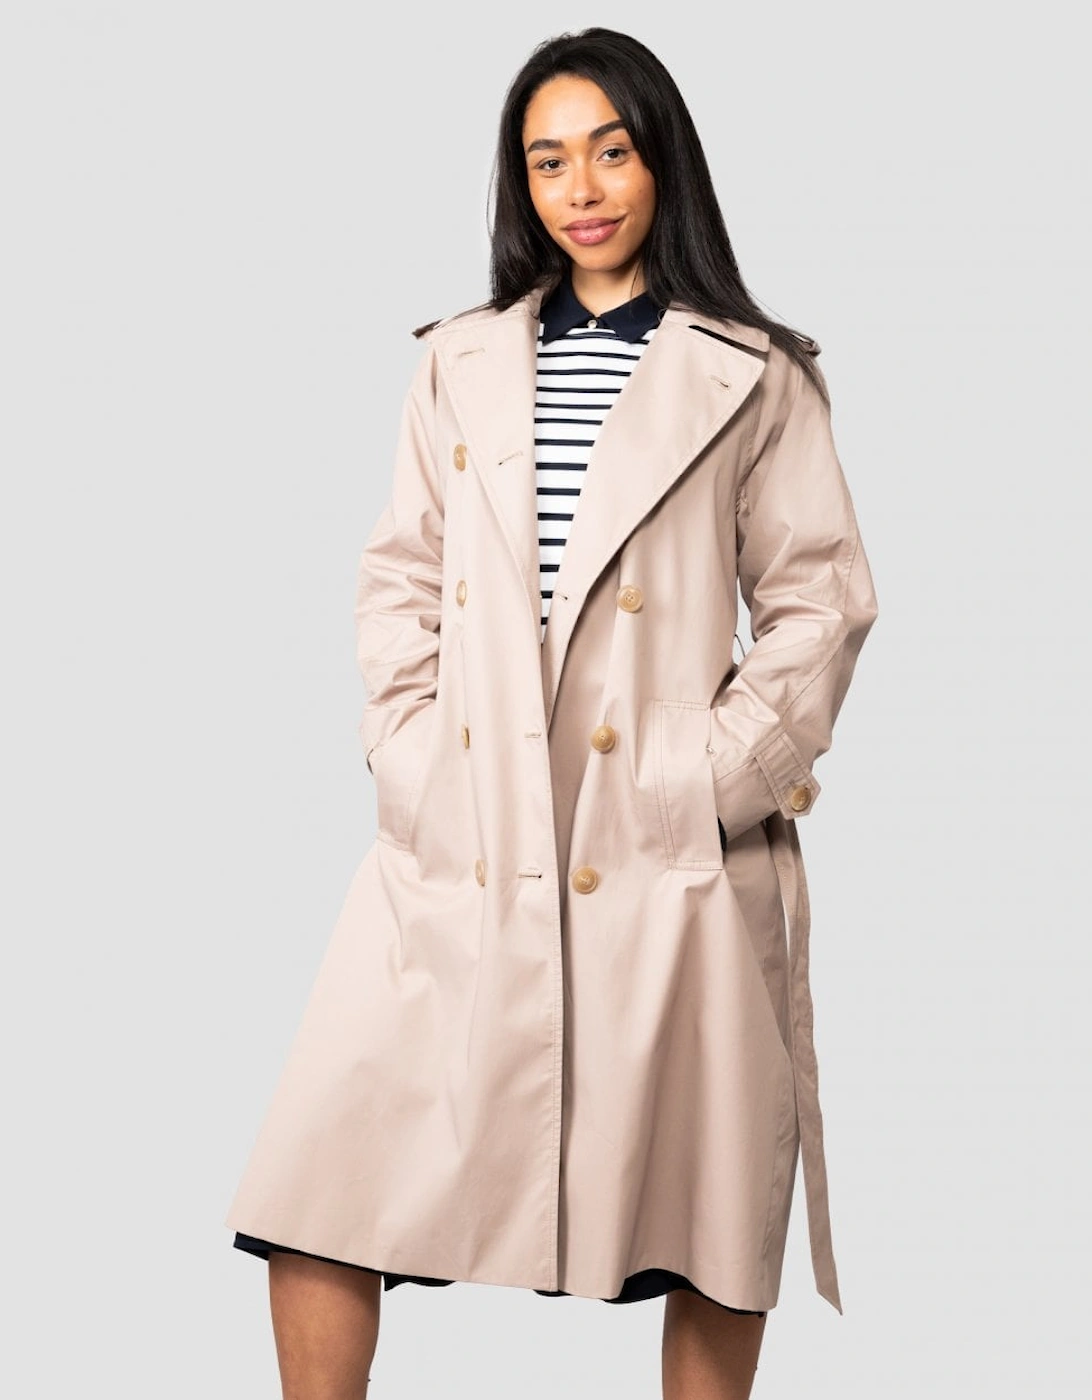 Cotton Blend Womens Trenchcoat